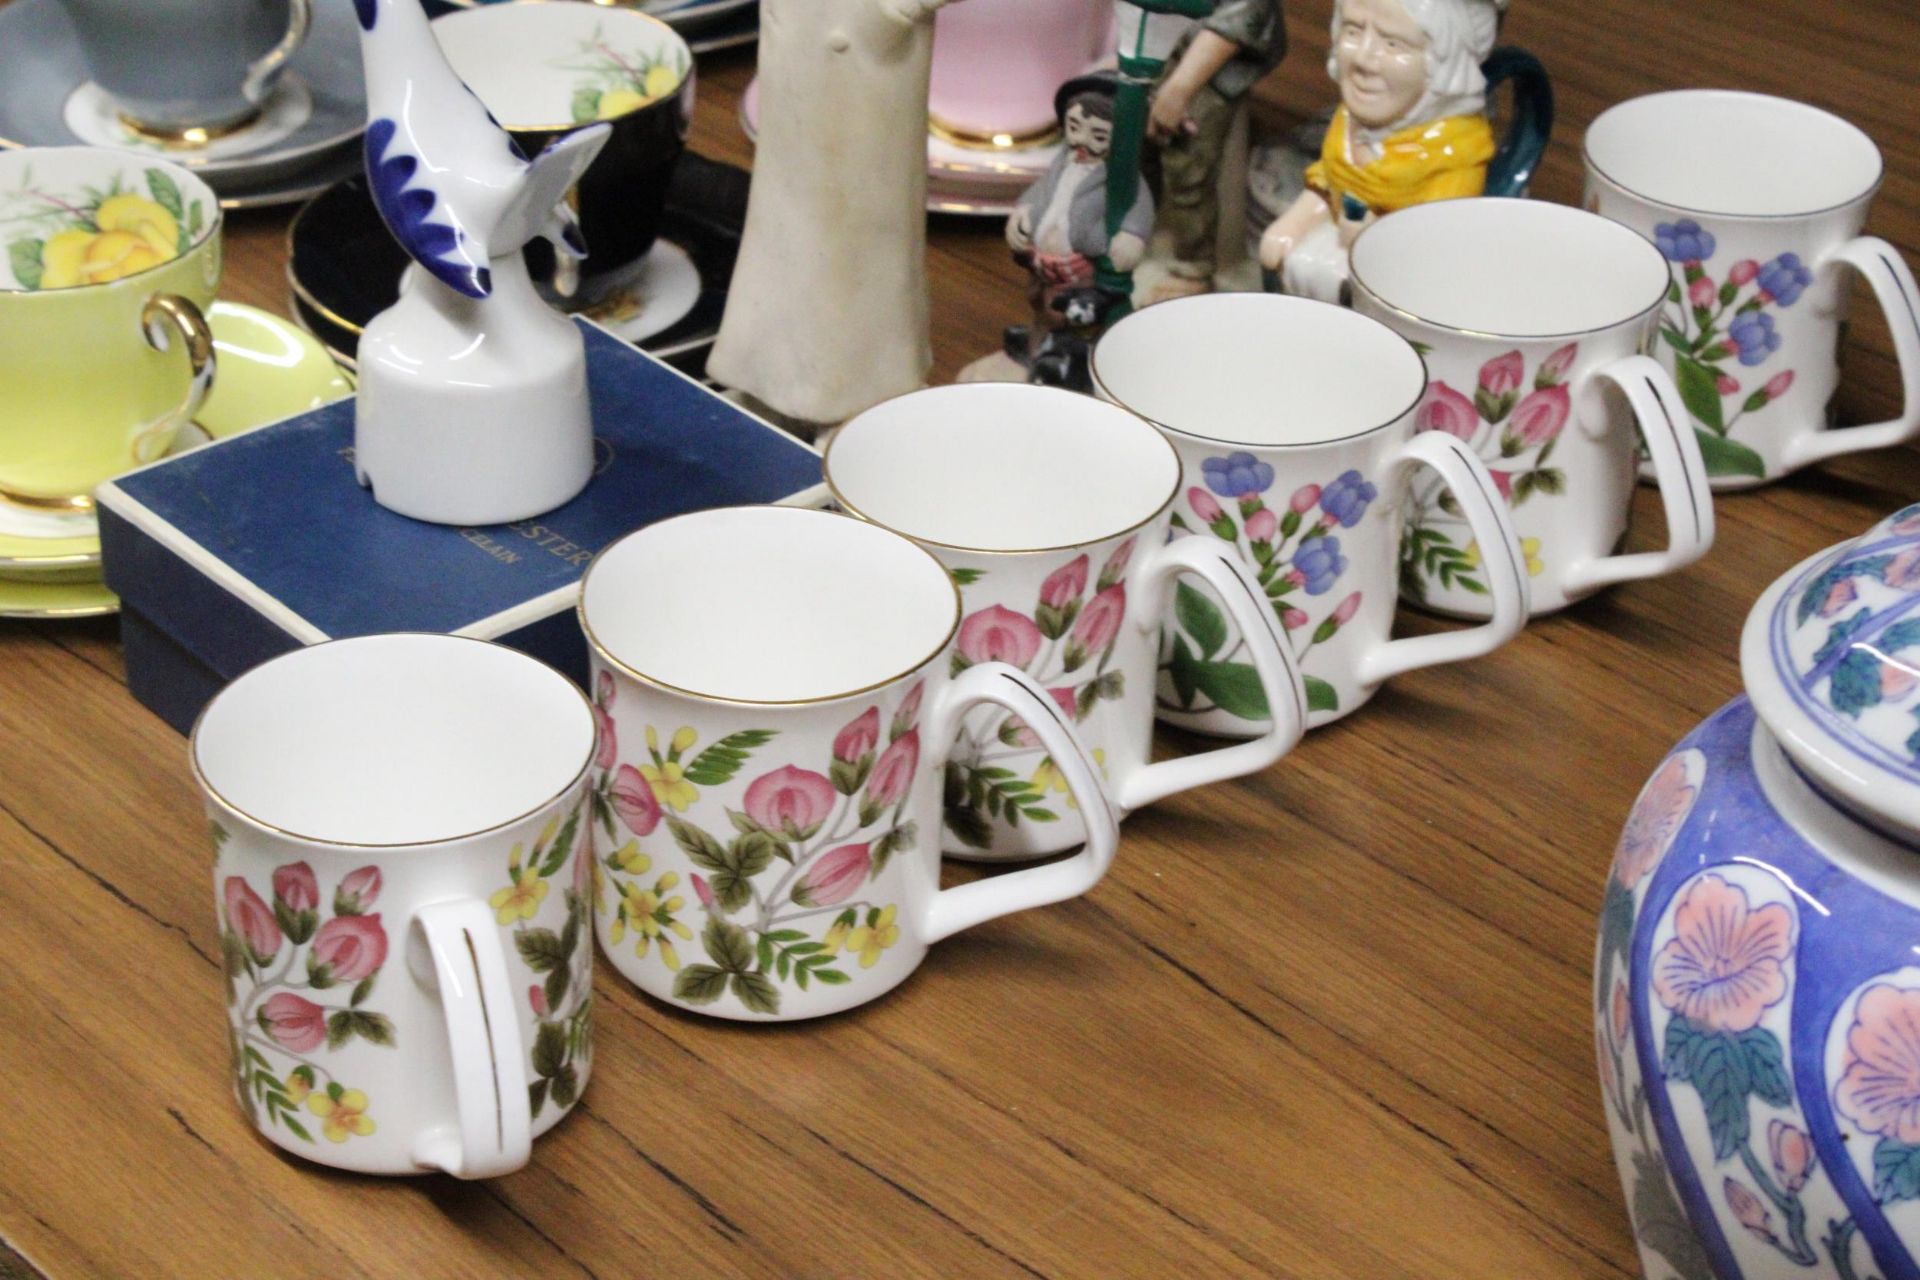 SIX IMPERIAL BONE CHINA TRIOS, SIX CHINA MUGS PLUS FIGURINES AND A BOXED ROYAL WORCESTER PIE FUNNEL - Image 6 of 6